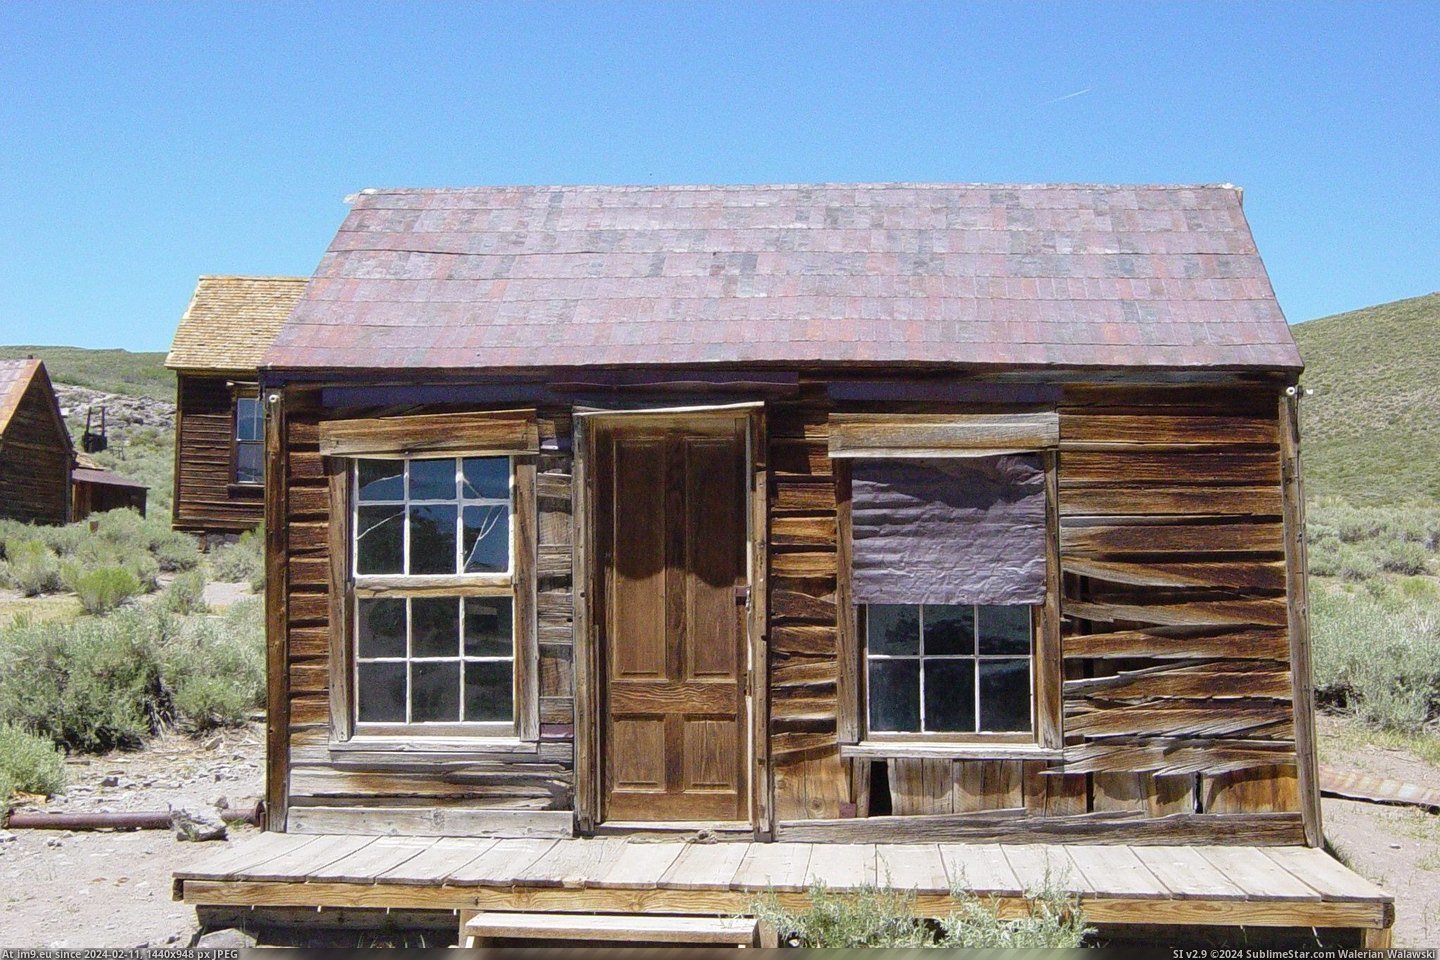 Moyle House North In Bodie, California (in Bodie - a ghost town in Eastern California)